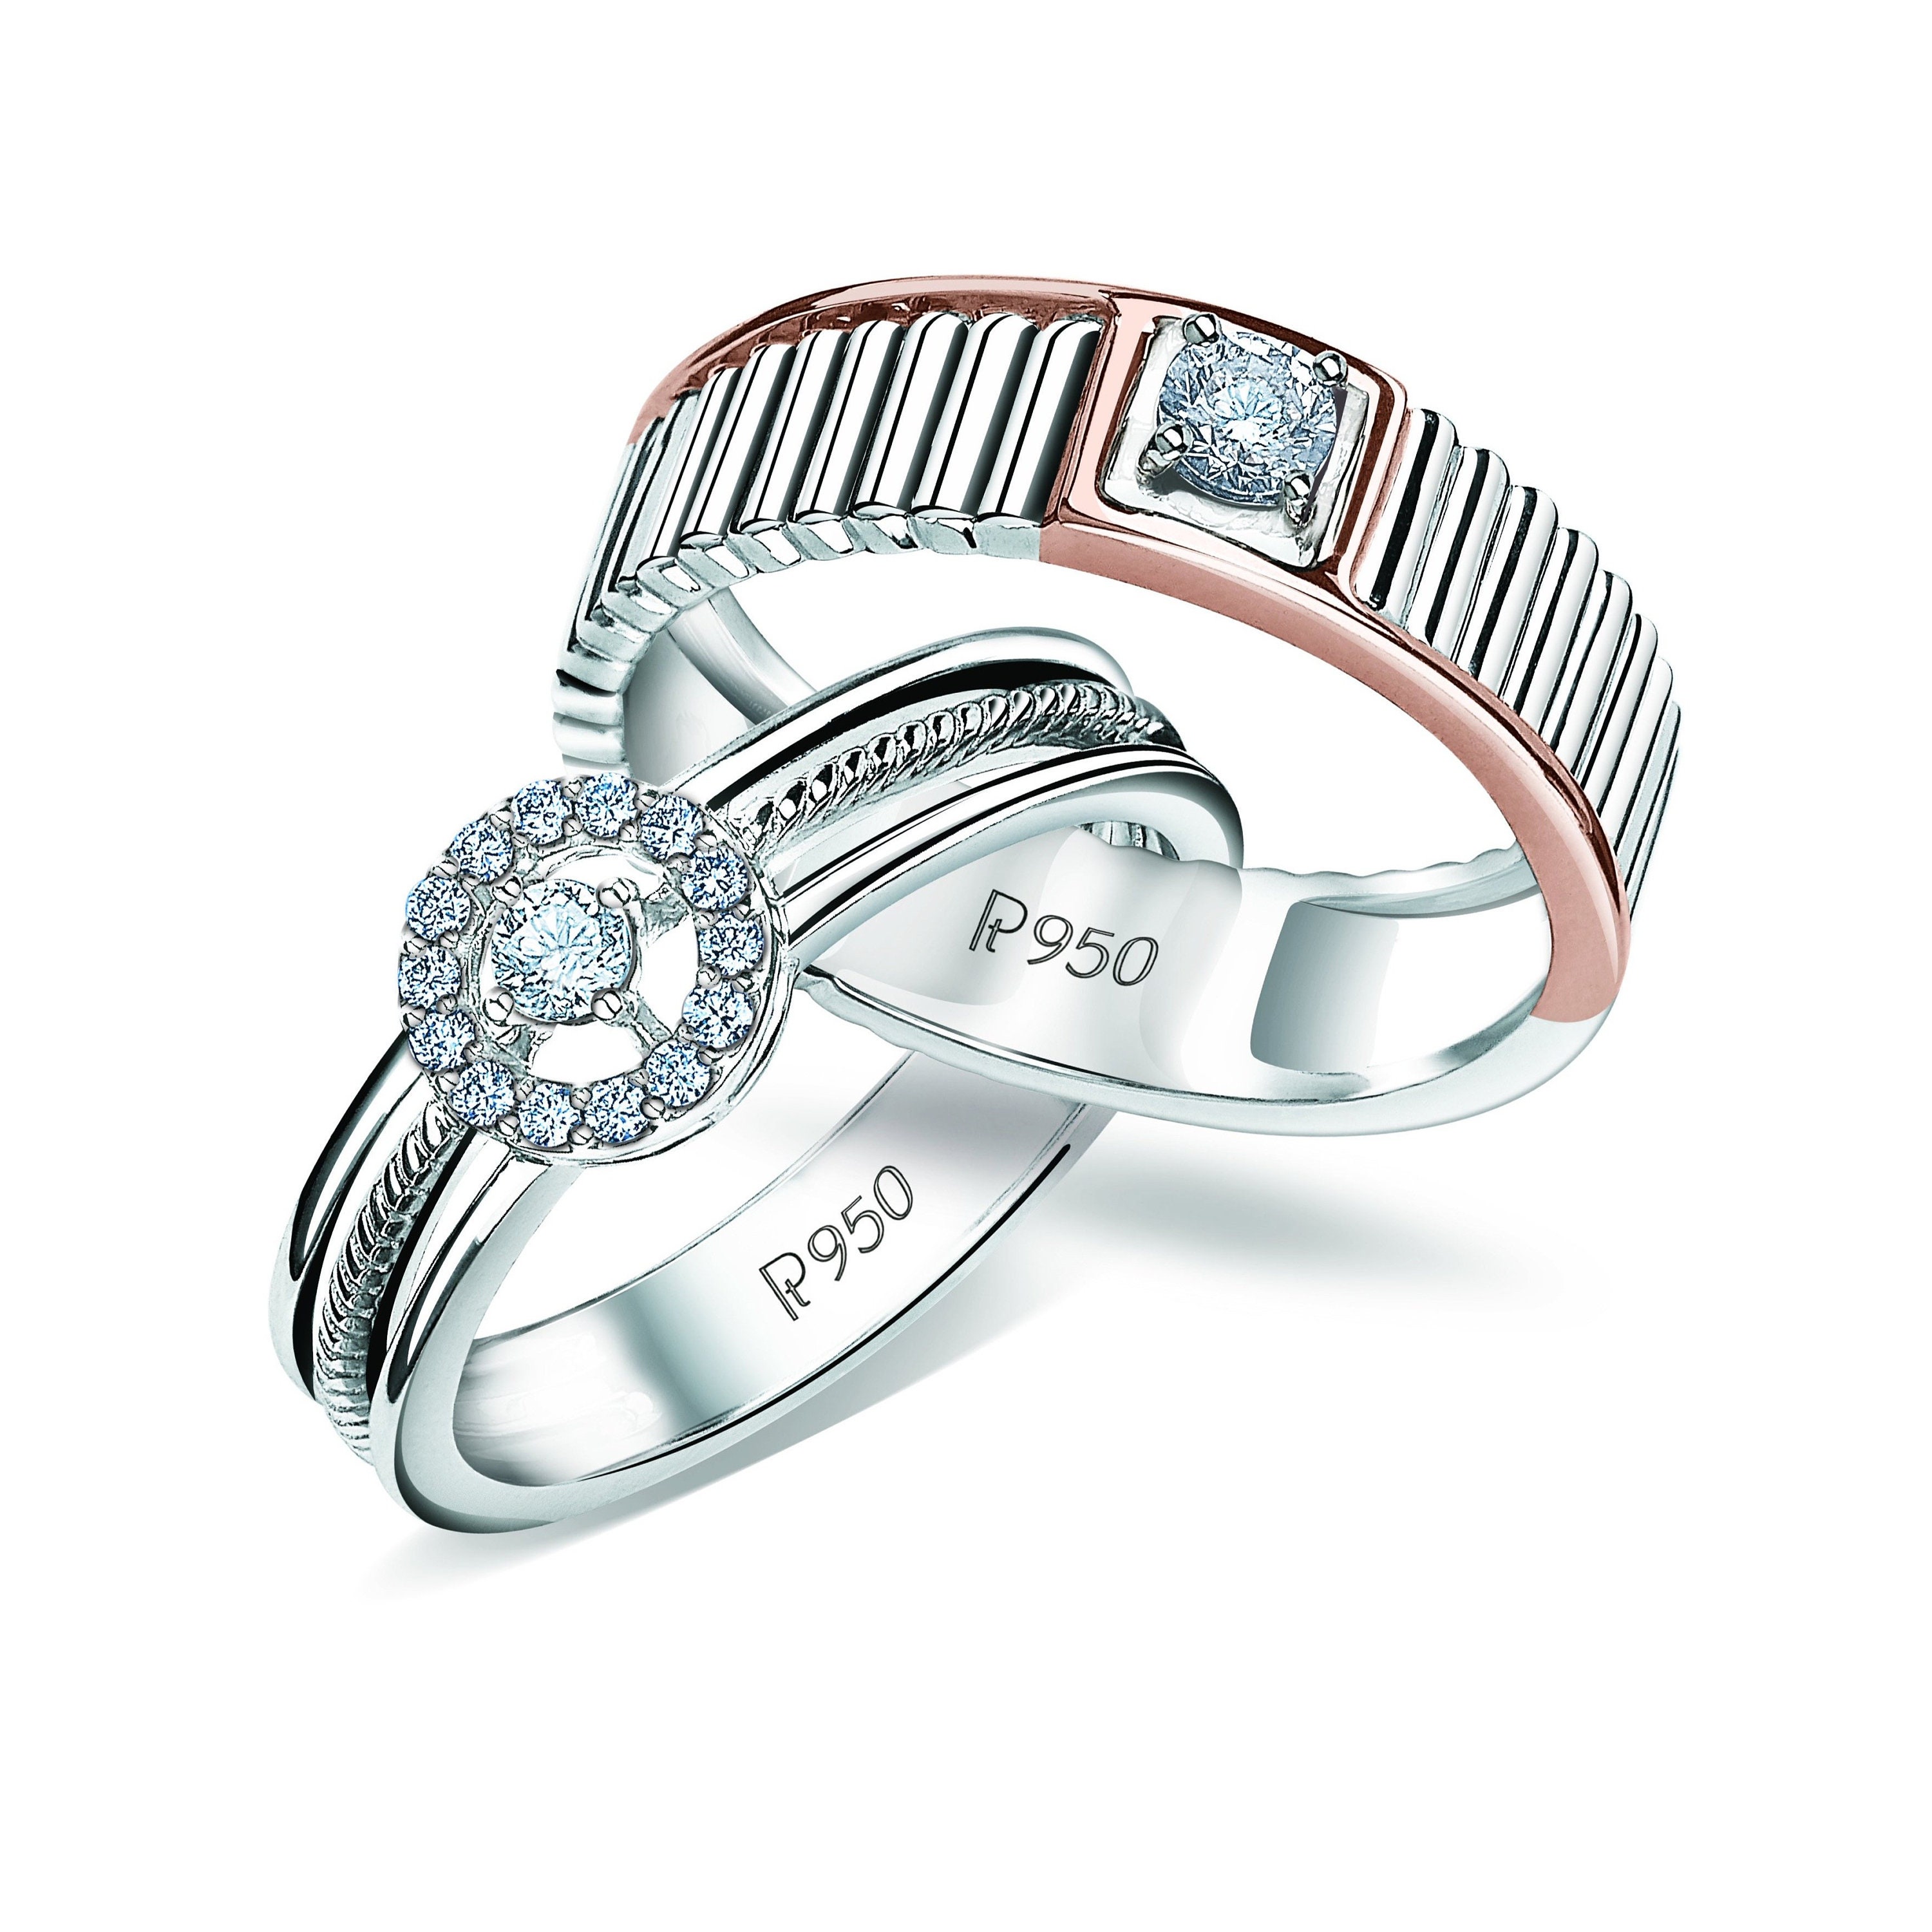 Buy STYLISH TEENS Beauteous Stunning Valentine Silver Plated Zircon Couple  Rings Online at Low Prices in India - Paytmmall.com